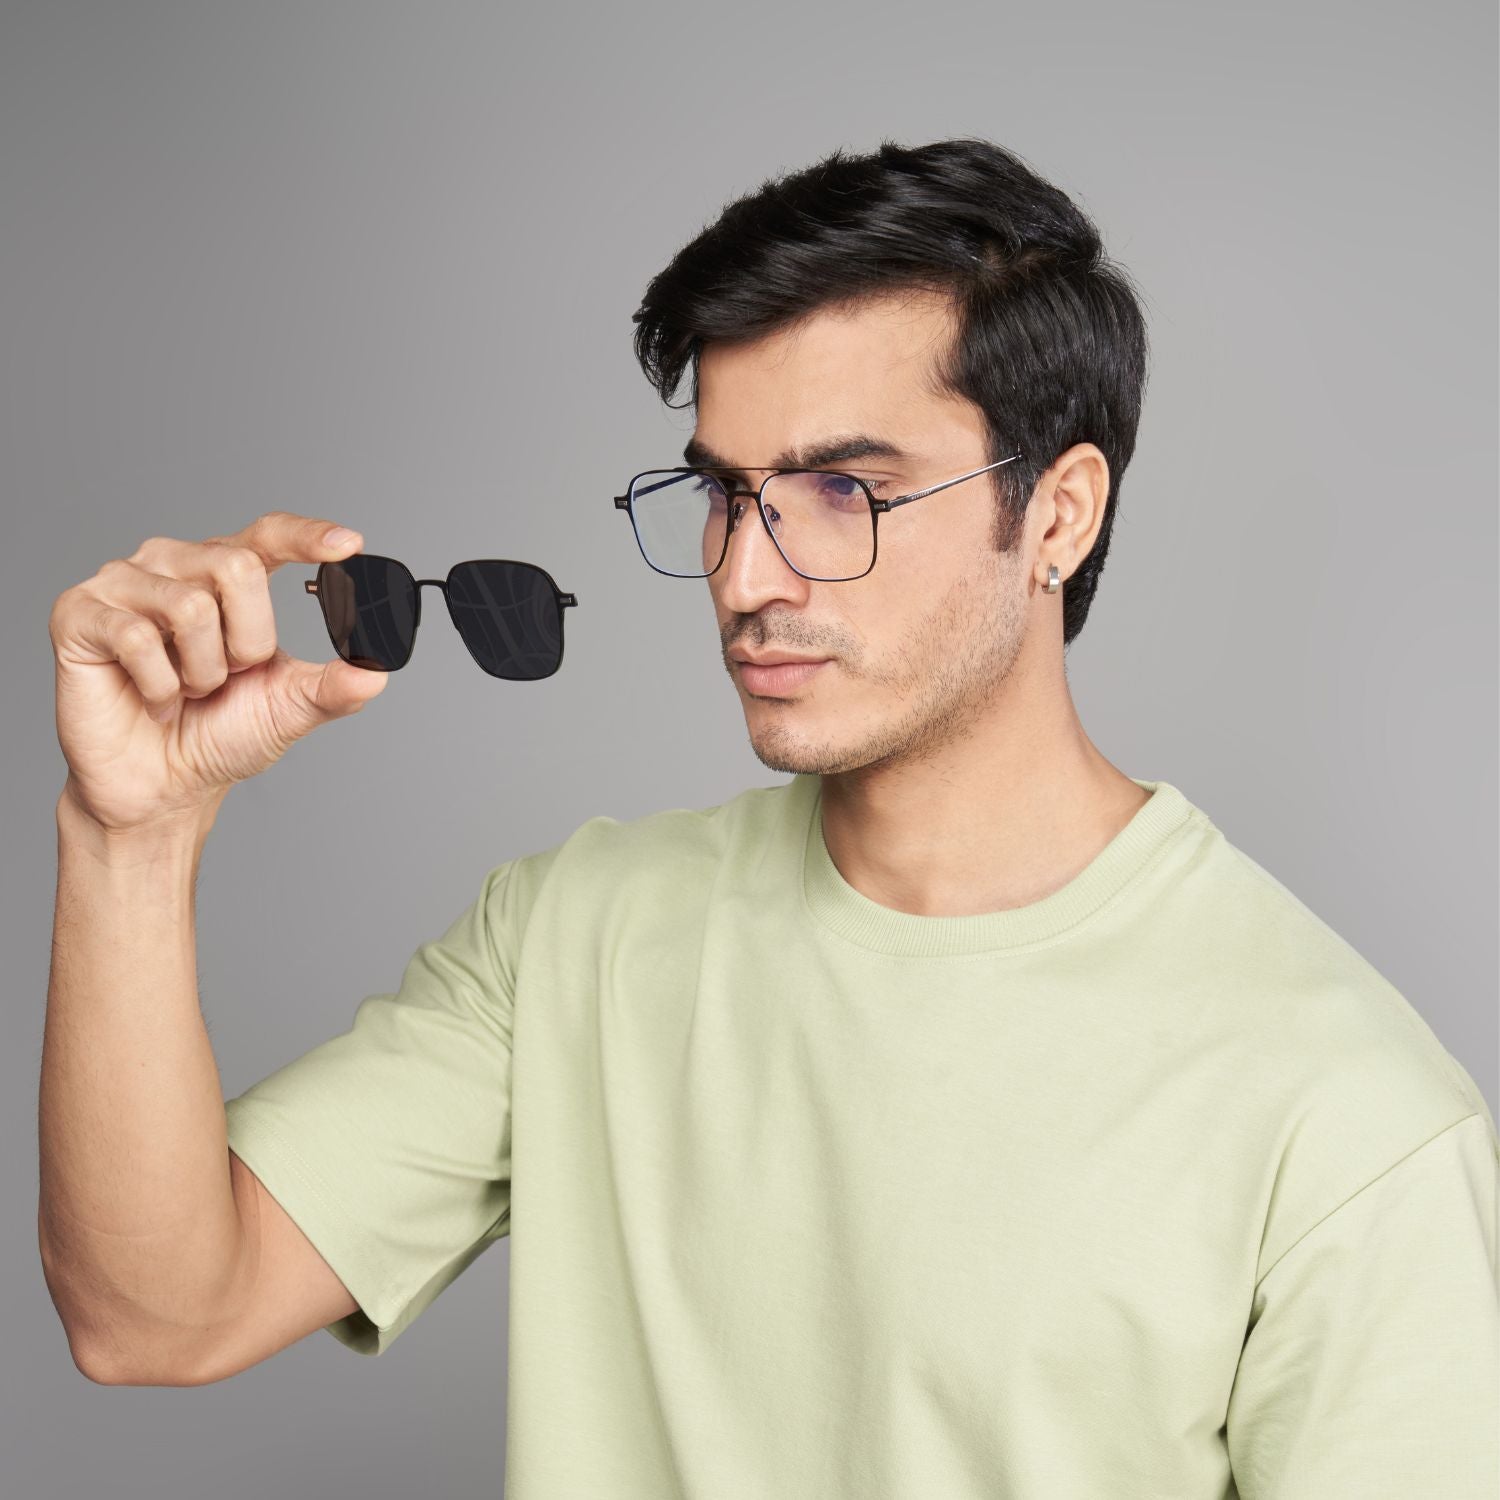 Day night changeable lens eyeshade with detachable clips for men and women, detachable clip close up.